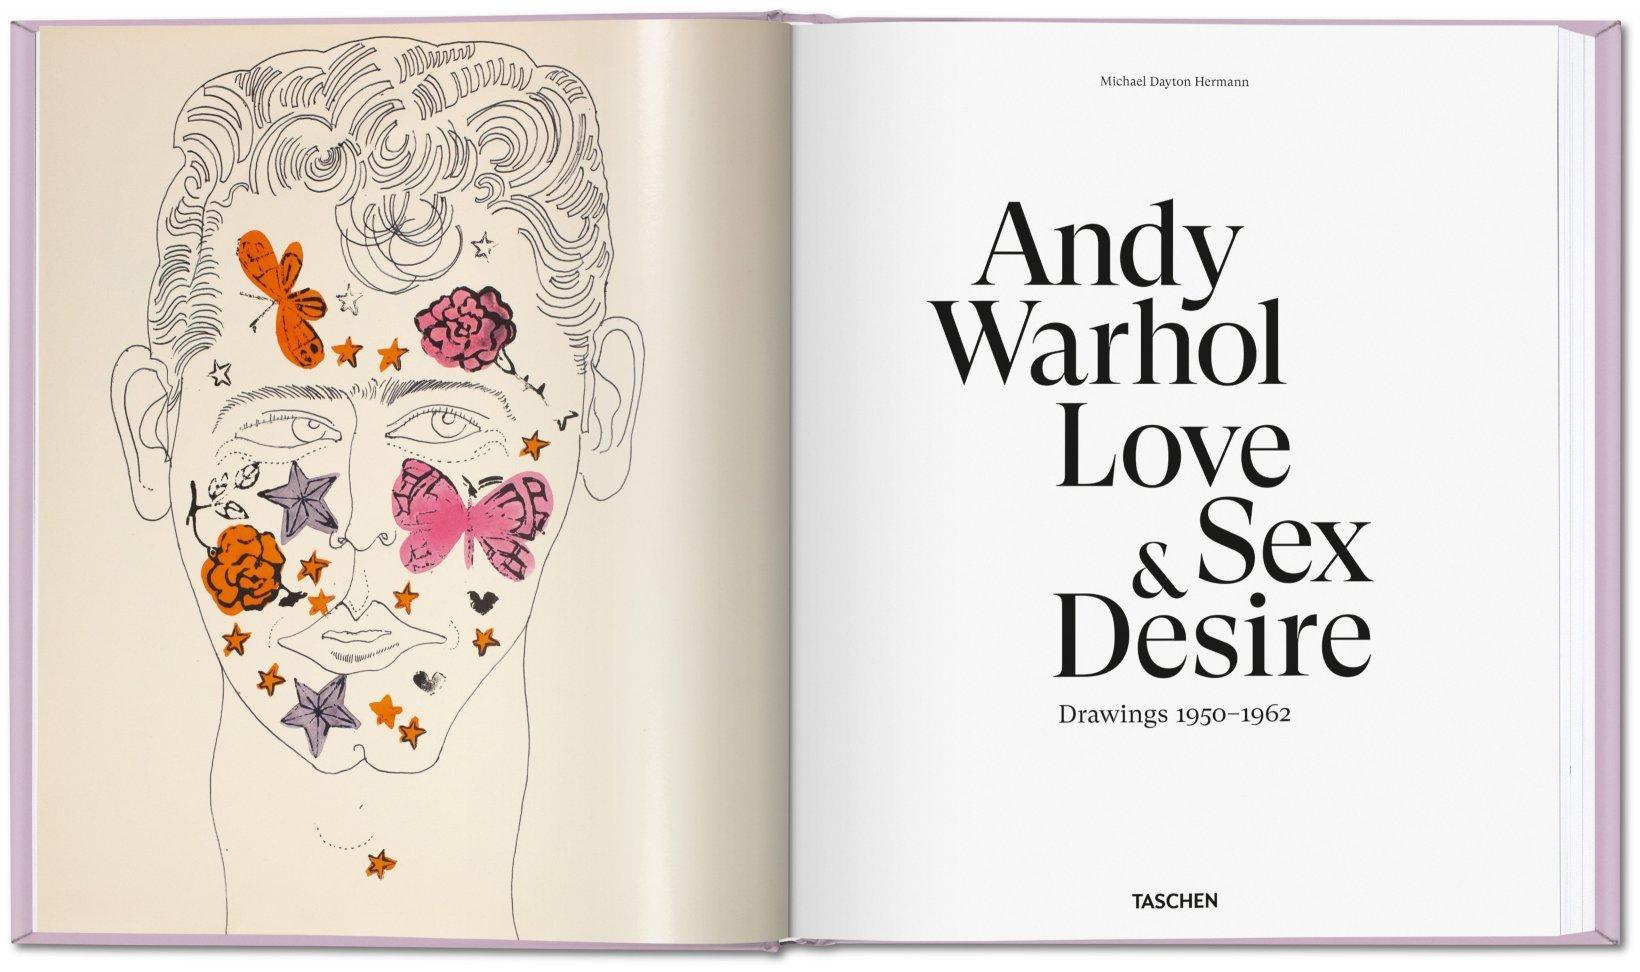 A rare and intimate addition to the Warhol canon
Well before Andy Warhol’s rise to the pinnacle of Pop Art, he created and exhibited seductive drawings celebrating male beauty. Andy Warhol Love, Sex, & Desire: Drawings 1950-1962 features over three